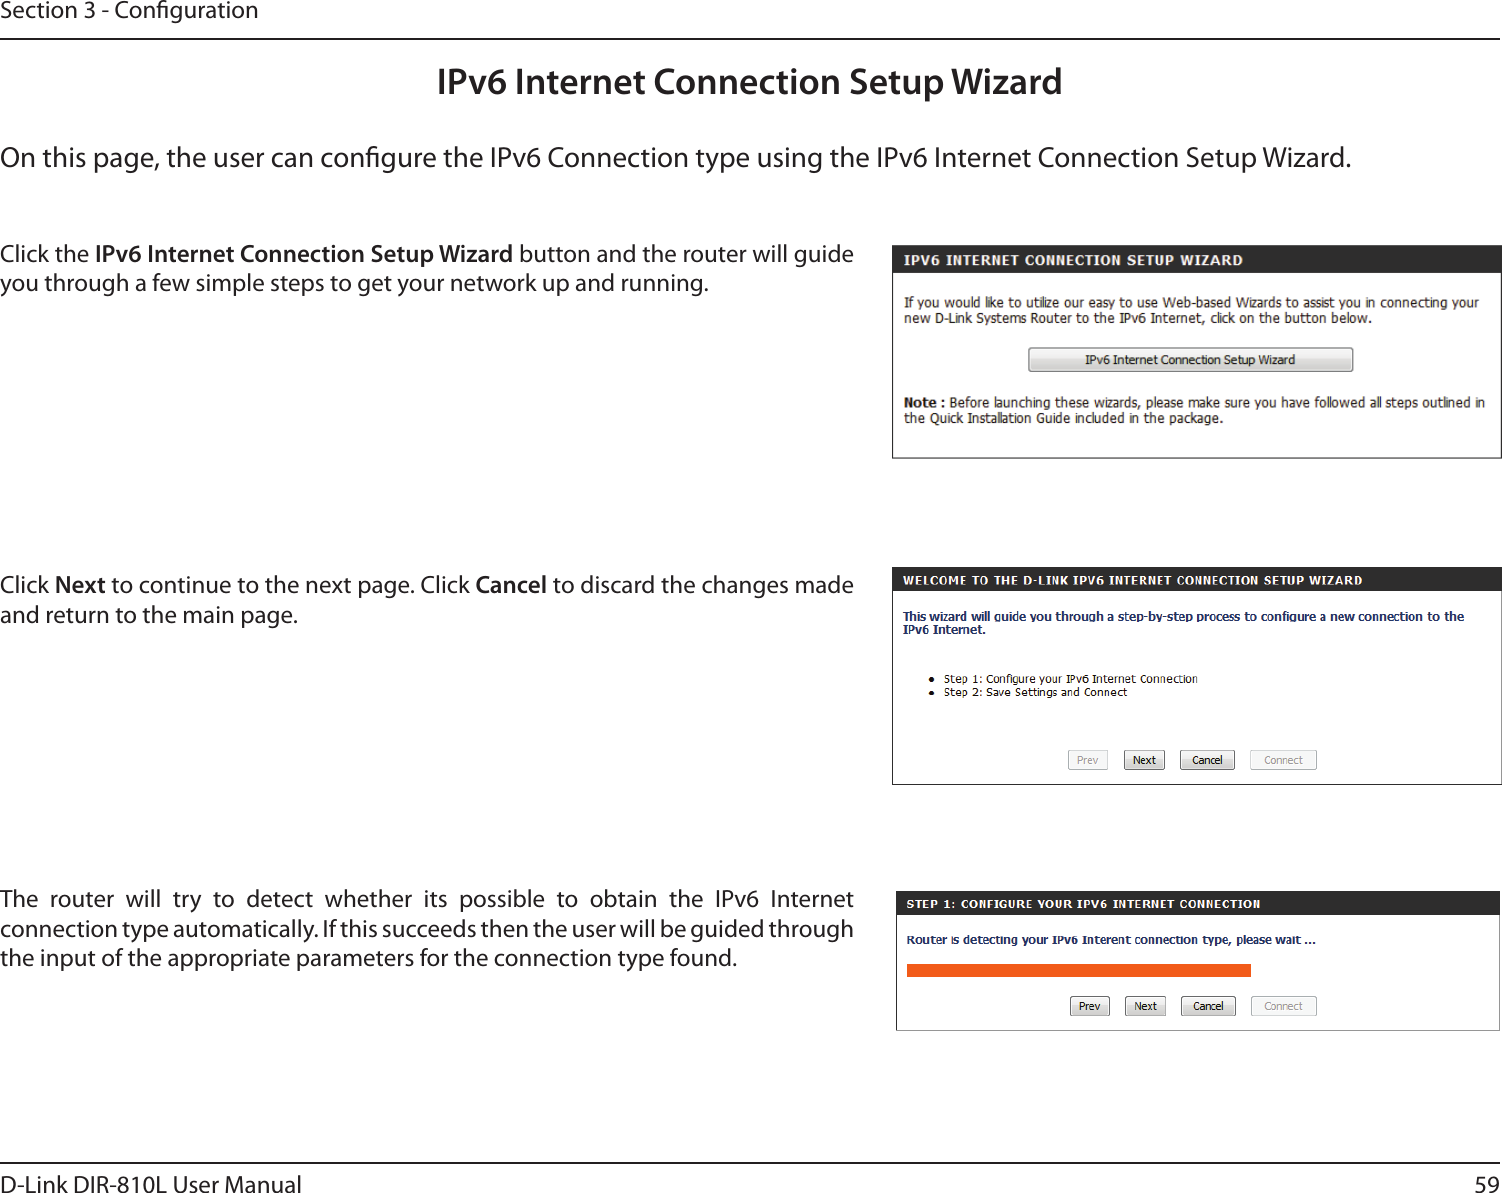 59D-Link DIR-810L User ManualSection 3 - CongurationIPv6 Internet Connection Setup WizardOn this page, the user can congure the IPv6 Connection type using the IPv6 Internet Connection Setup Wizard.Click the IPv6 Internet Connection Setup Wizard button and the router will guide you through a few simple steps to get your network up and running.Click Next to continue to the next page. Click Cancel to discard the changes made and return to the main page.The  router  will  try  to  detect  whether  its  possible  to  obtain  the  IPv6  Internet connection type automatically. If this succeeds then the user will be guided through the input of the appropriate parameters for the connection type found.